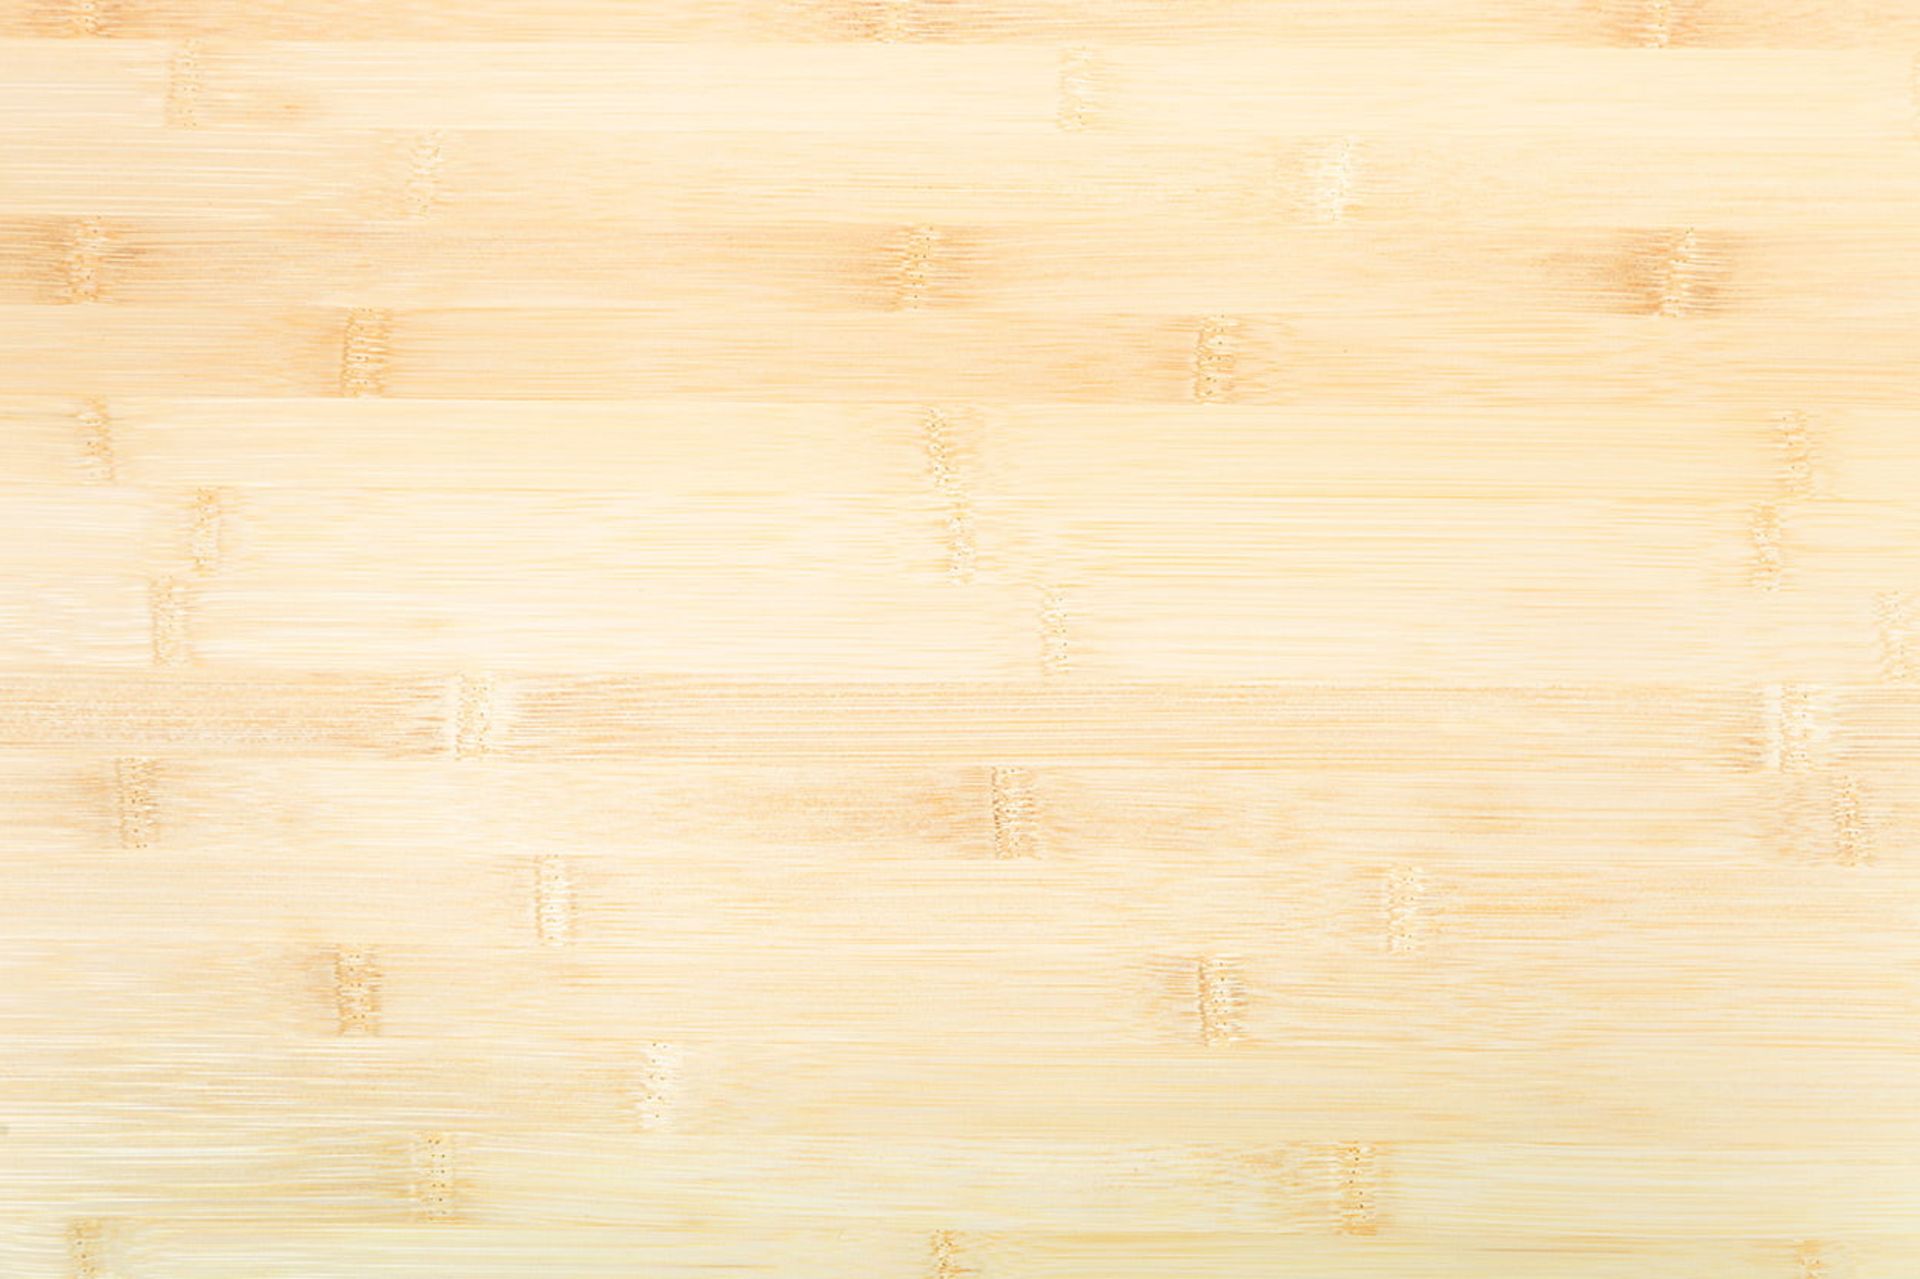 1 x Layered Solid Bamboo Wood Worktop - Size: 3000 x 650 x 40mm - Ideal For Kitchens, Countertops, - Image 2 of 4